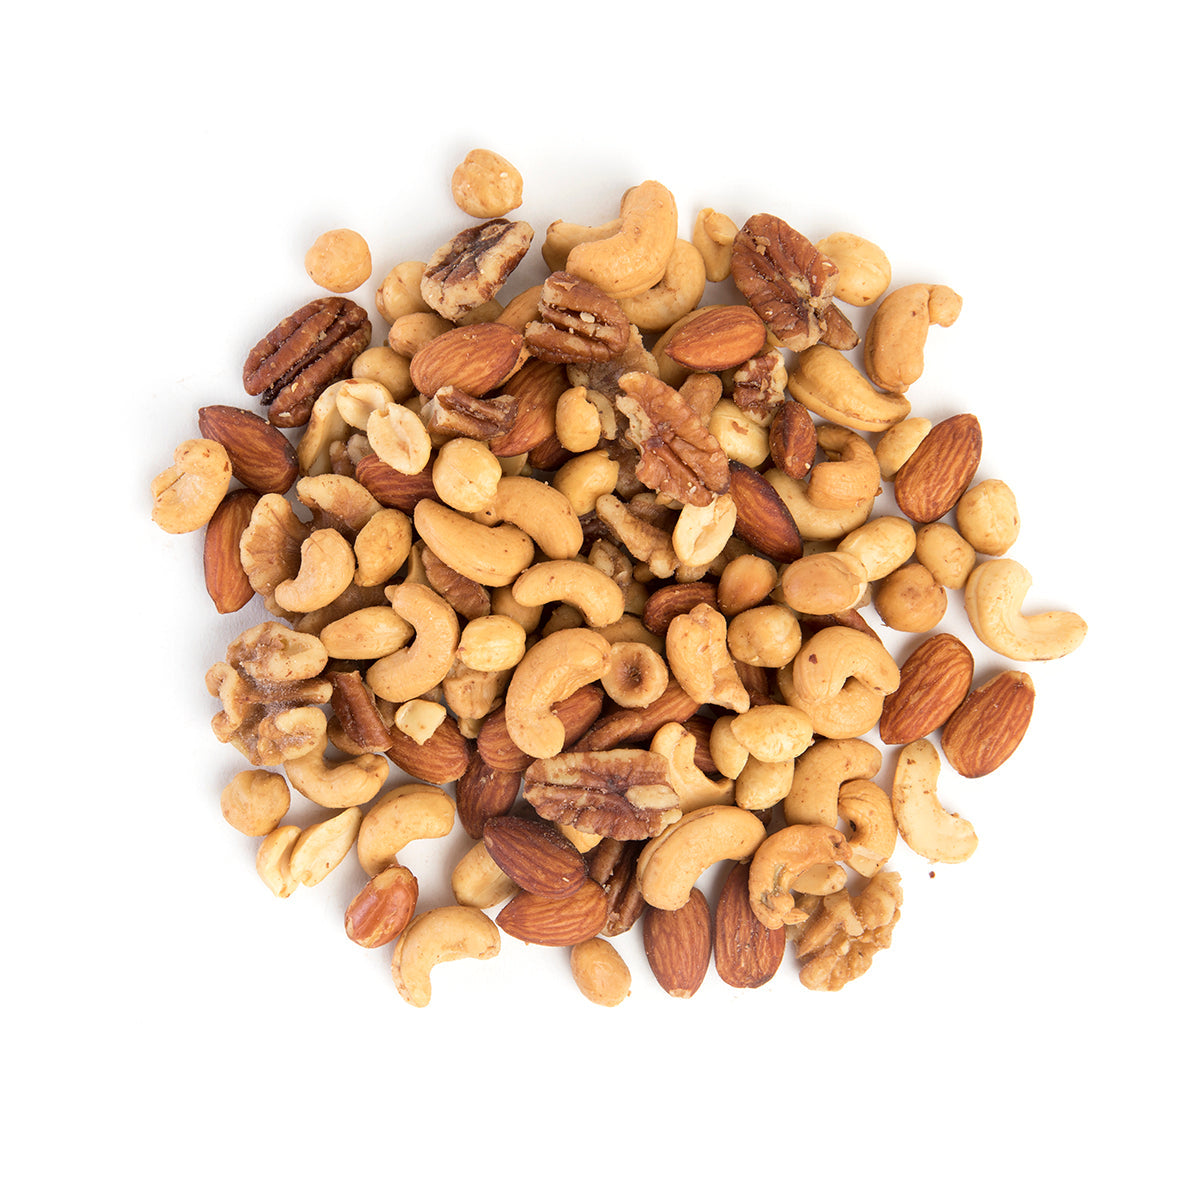 Bazzini Salted Mixed Nuts Competition Blend with Peanuts